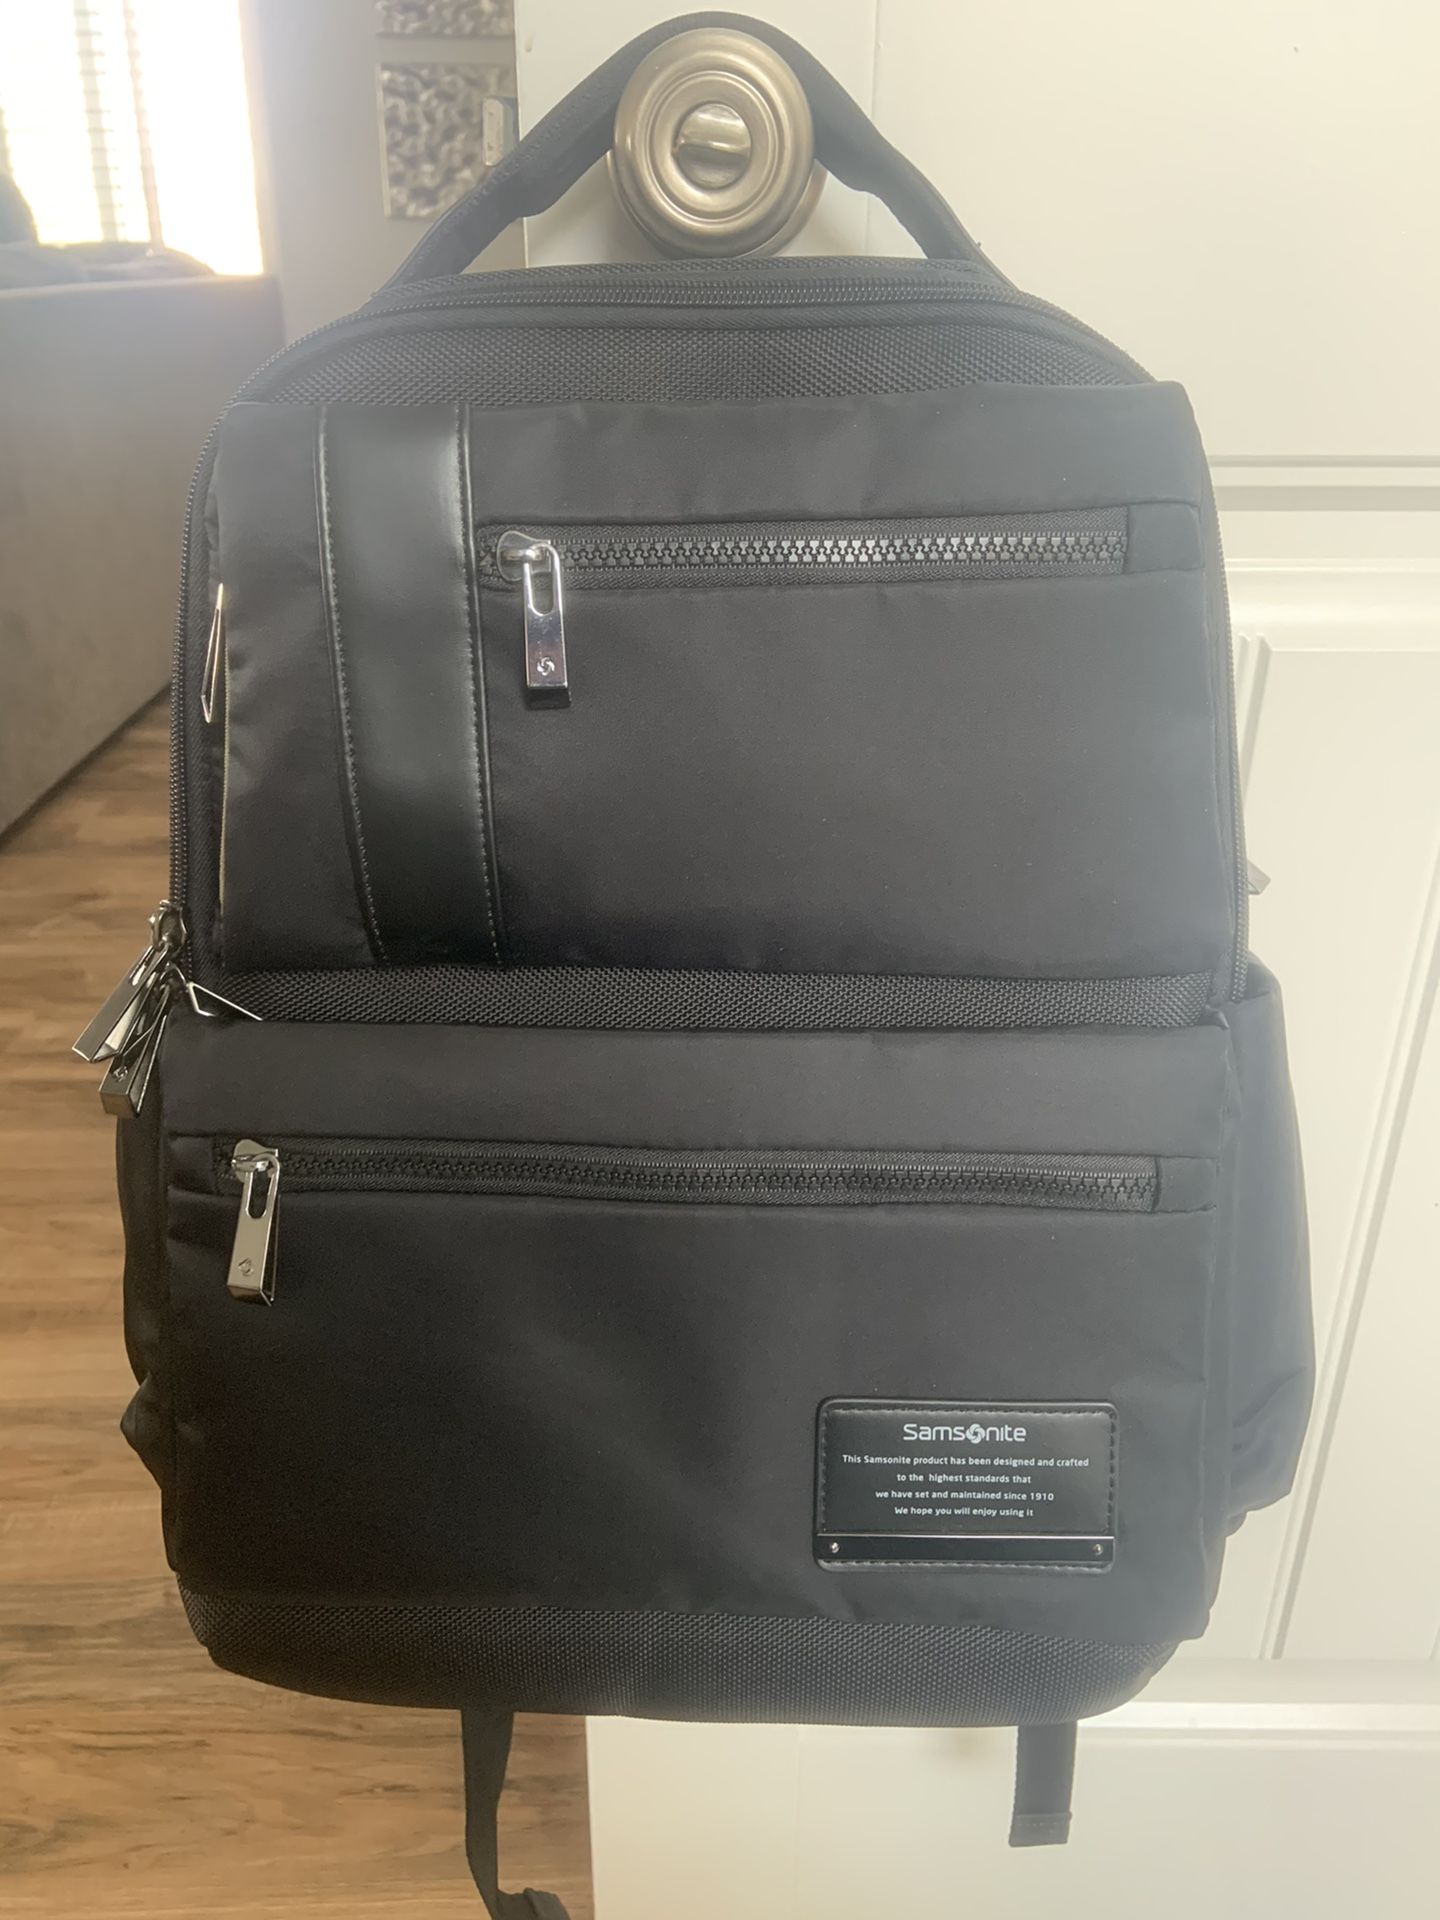 Samsonite Openroad 14.1” Laptop Backpack - MOVING & MUST SELL!